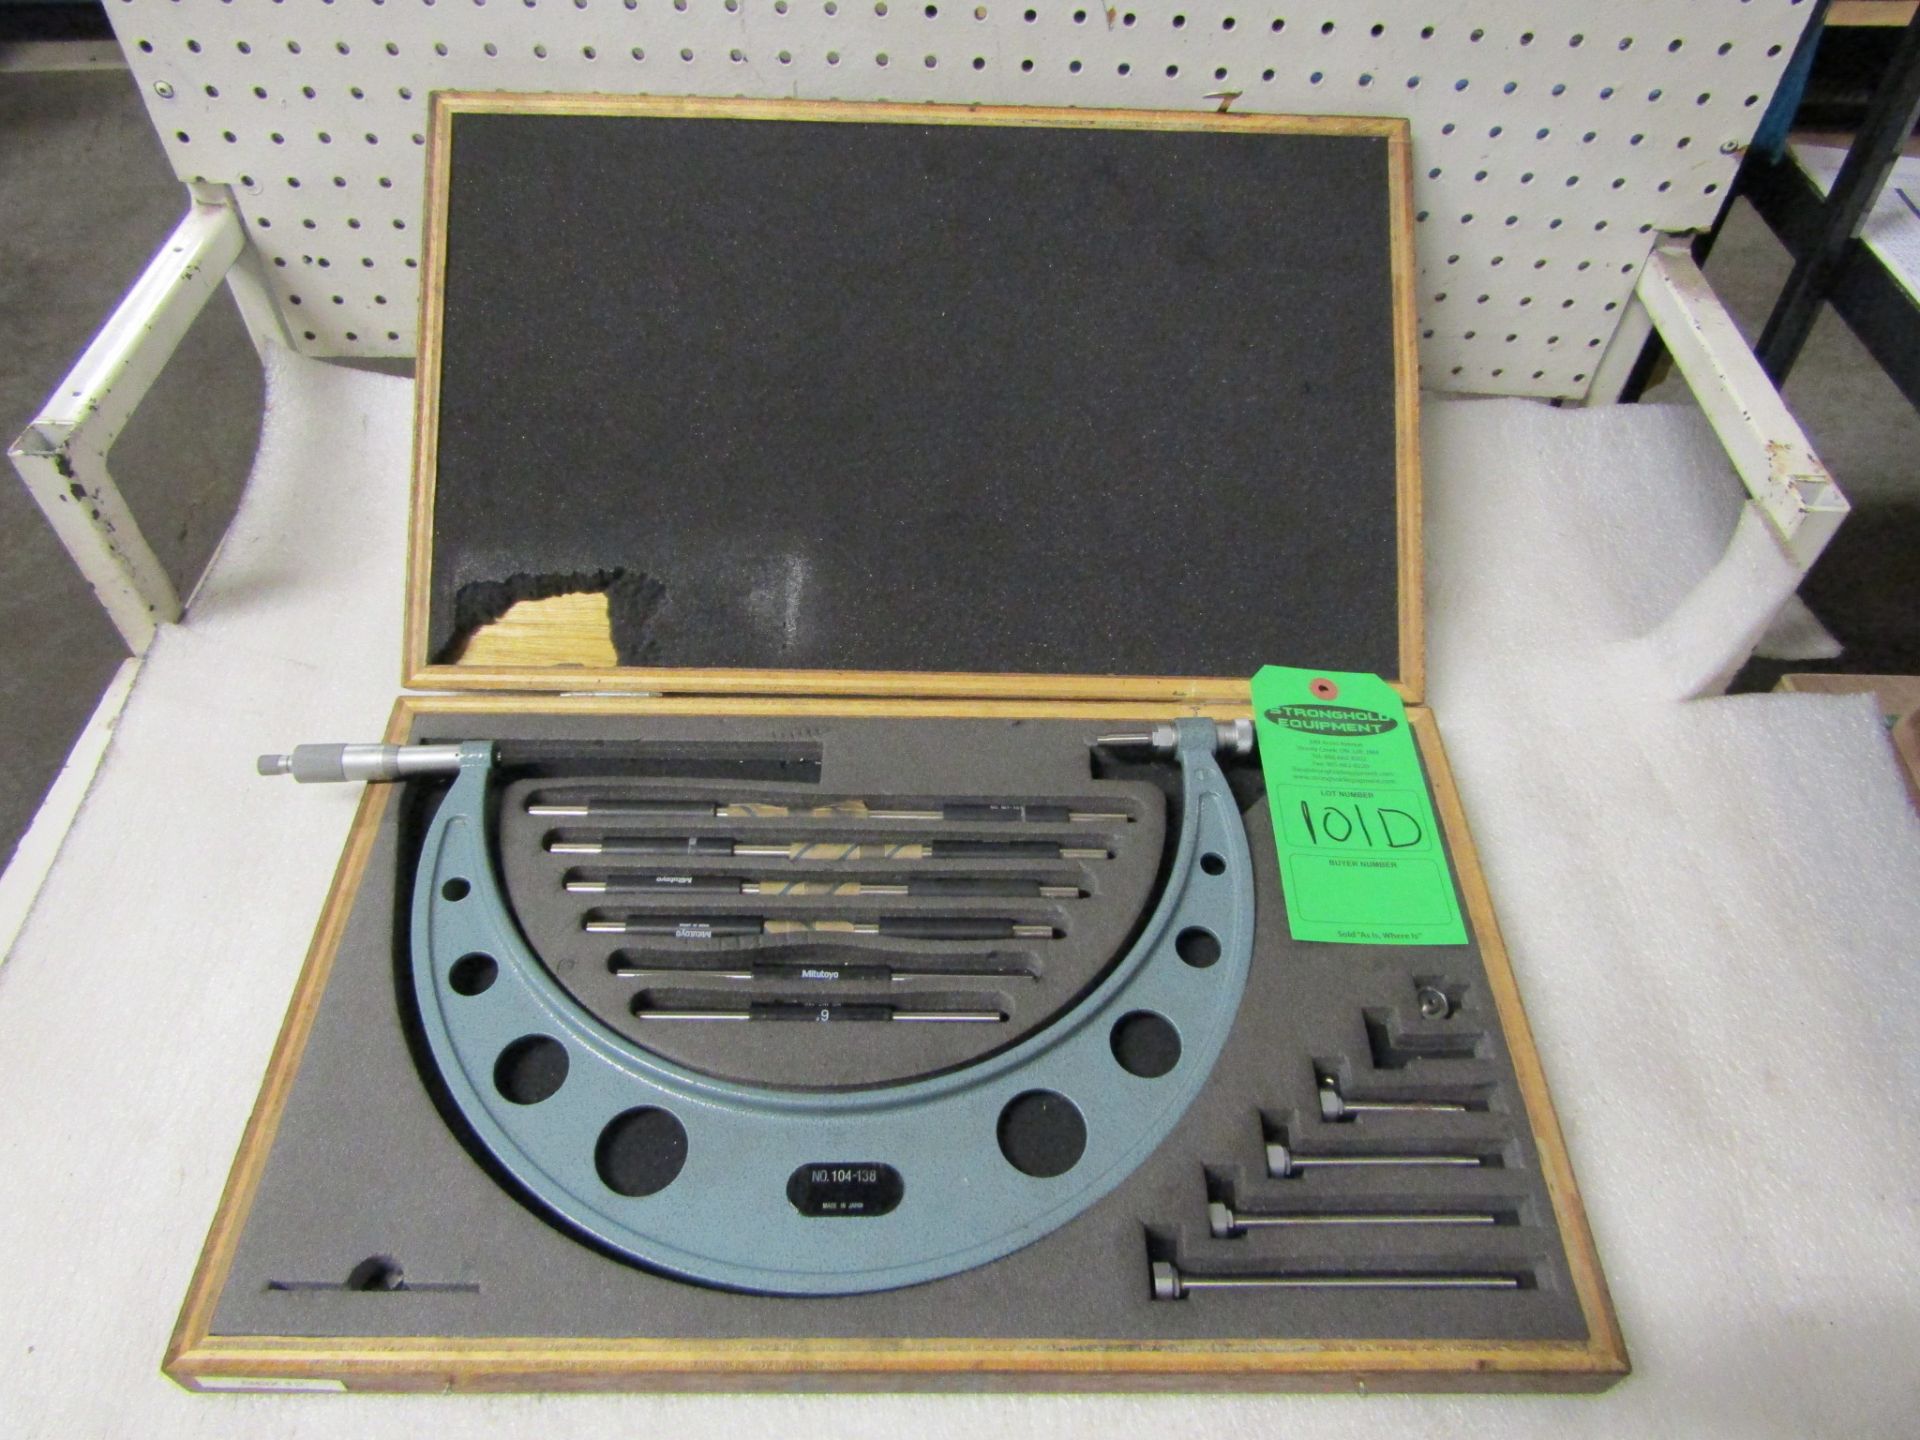 MINT Mitutoyo 6-12" Micrometer Set with Standards and attachments in case model 104-138